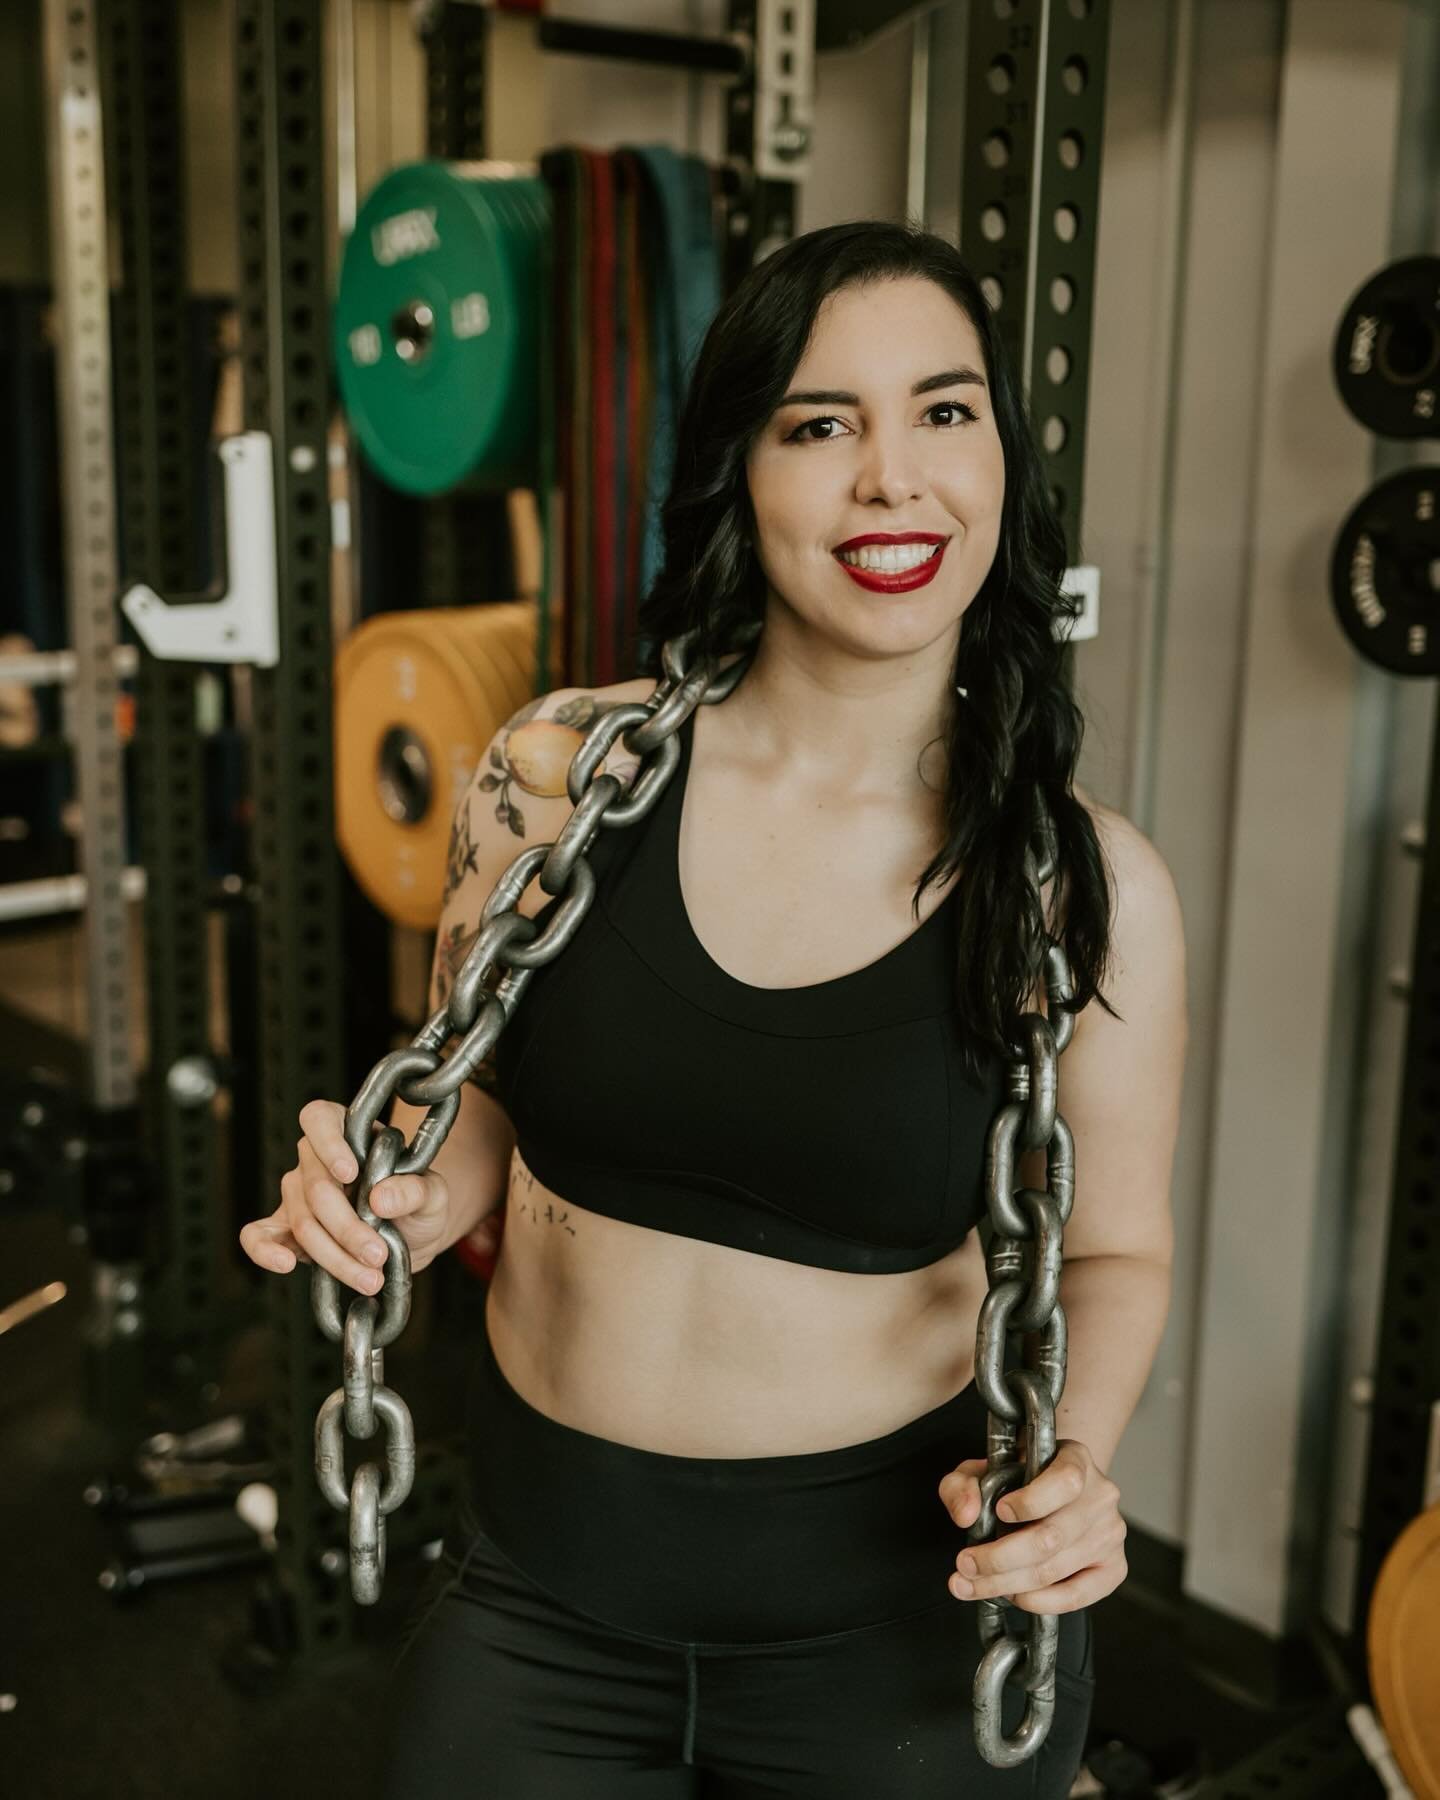 Believe you can, and you're halfway there. - Theodore Roosevelt 💜@anahizzzy 

1. What made you want to start working out and how did you feel about your first class?

I wanted to start working out because I needed structure in my life and I was stru